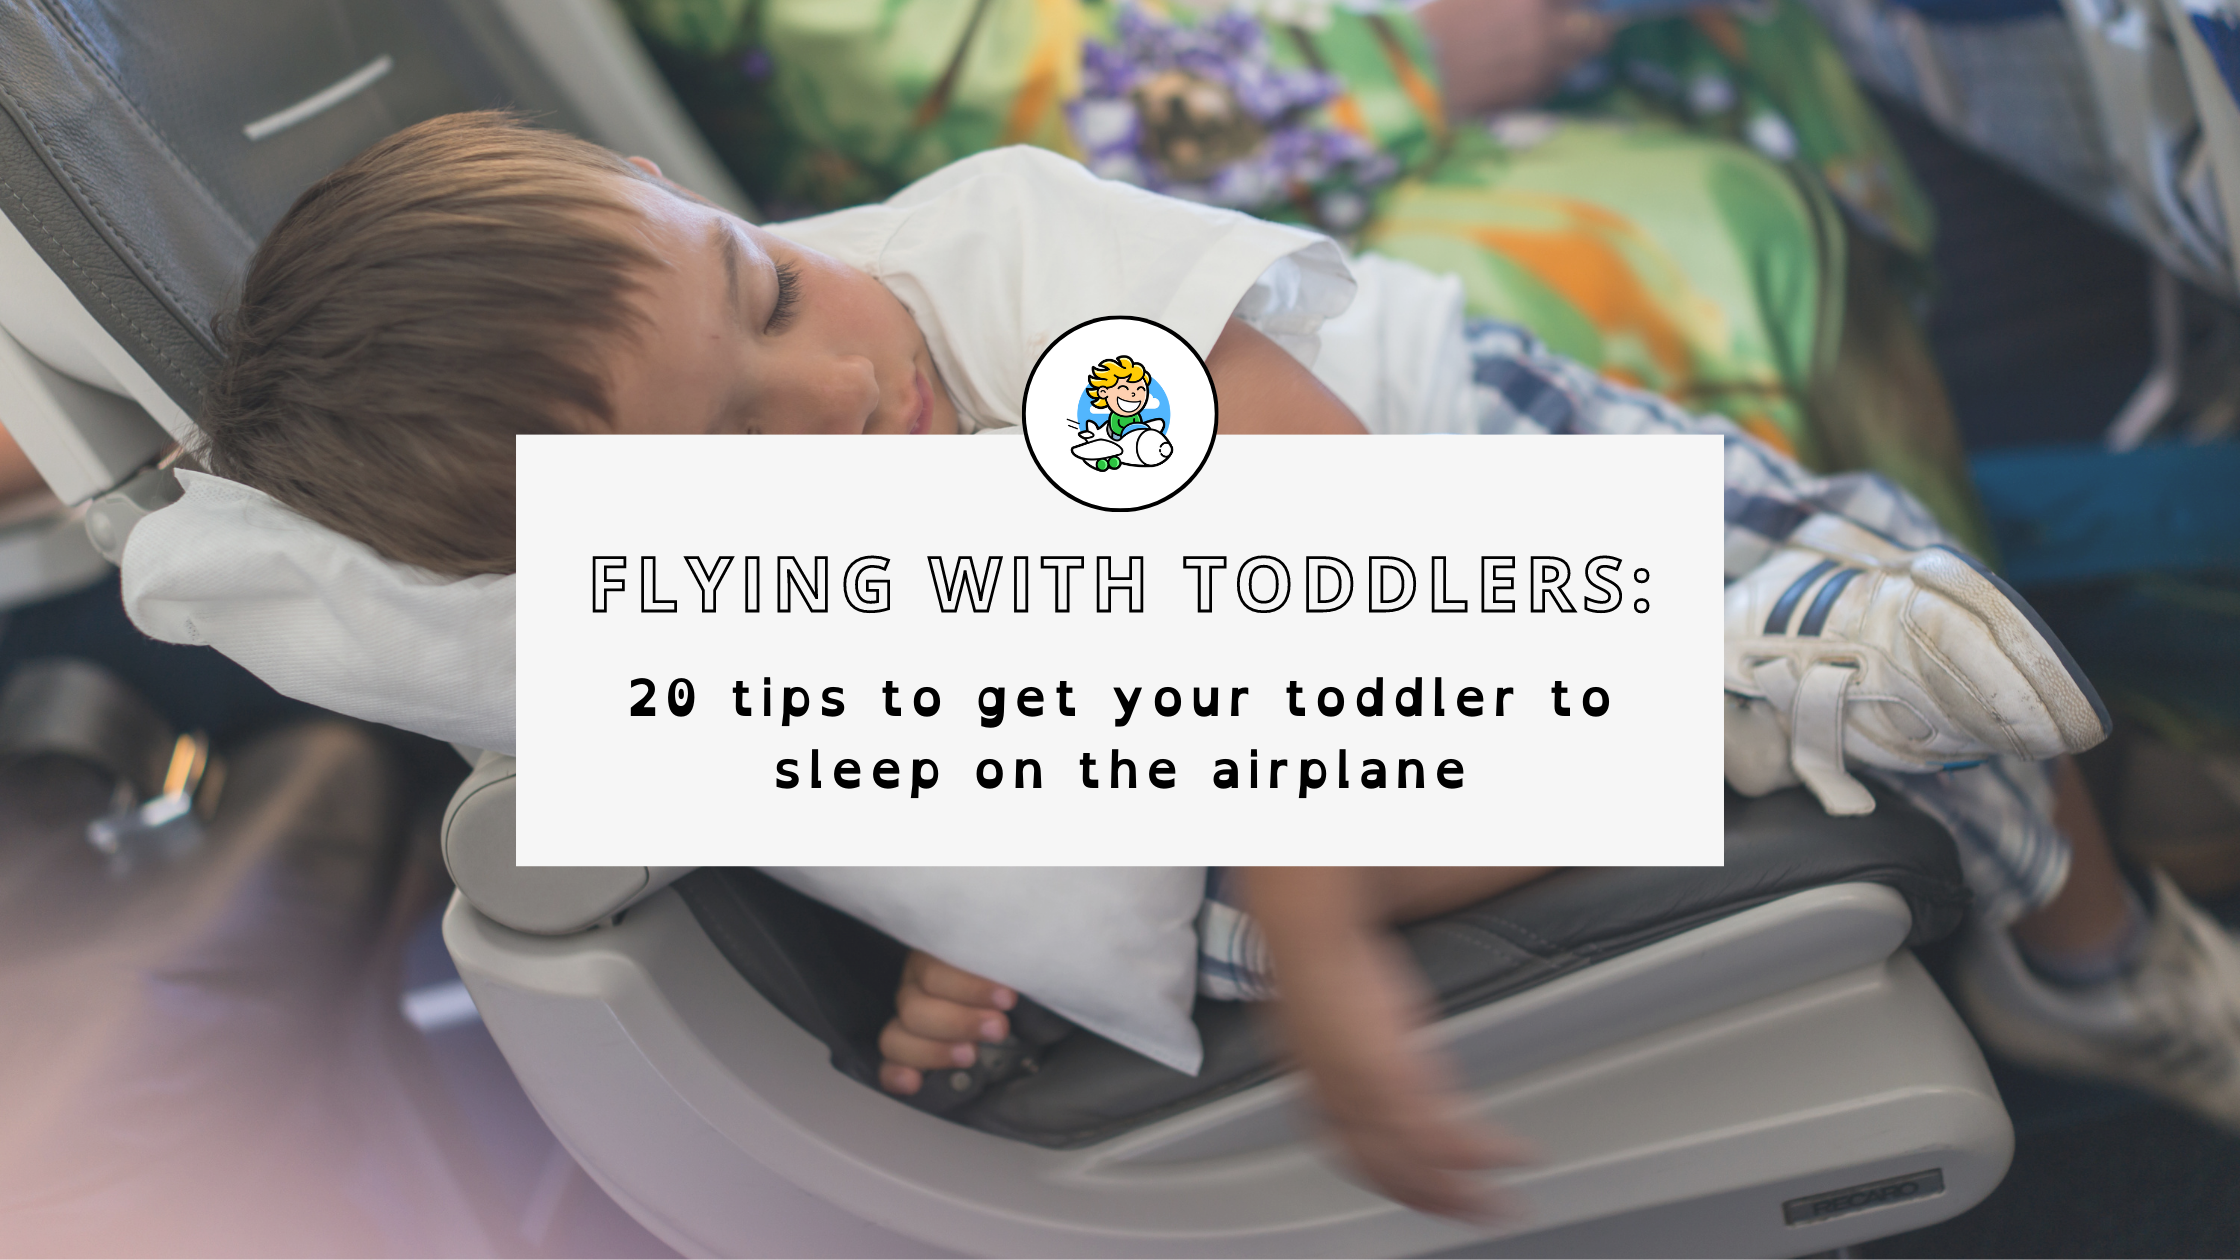 20 Tips to Get Your Toddler to Sleep on the Airplane